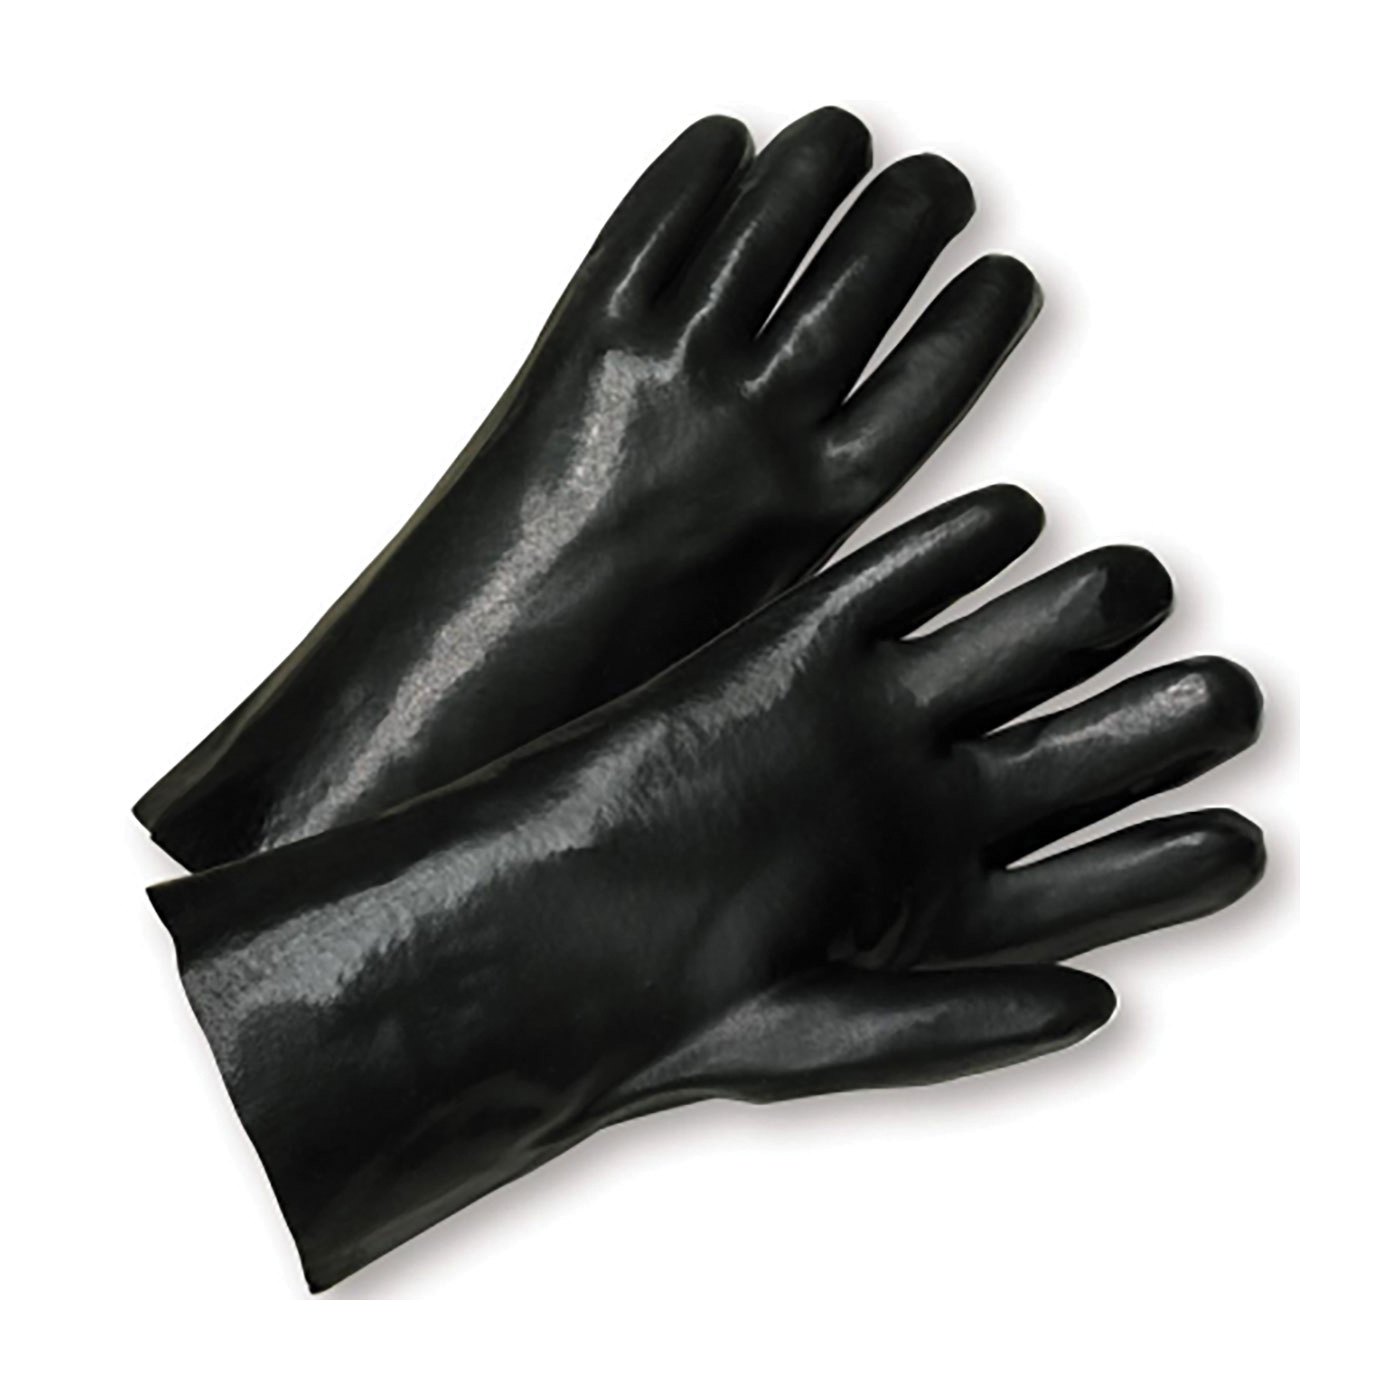 PIP® 1017 Standard Chemical-Resistant Gloves, L, Pair Hand, Black, Cotton Interlock Knit Lining, 10 in L, Resists: Abrasion, Acid, Chemical, Grease, Oil, Water and Solvent, Supported Support, Gauntlet Cuff